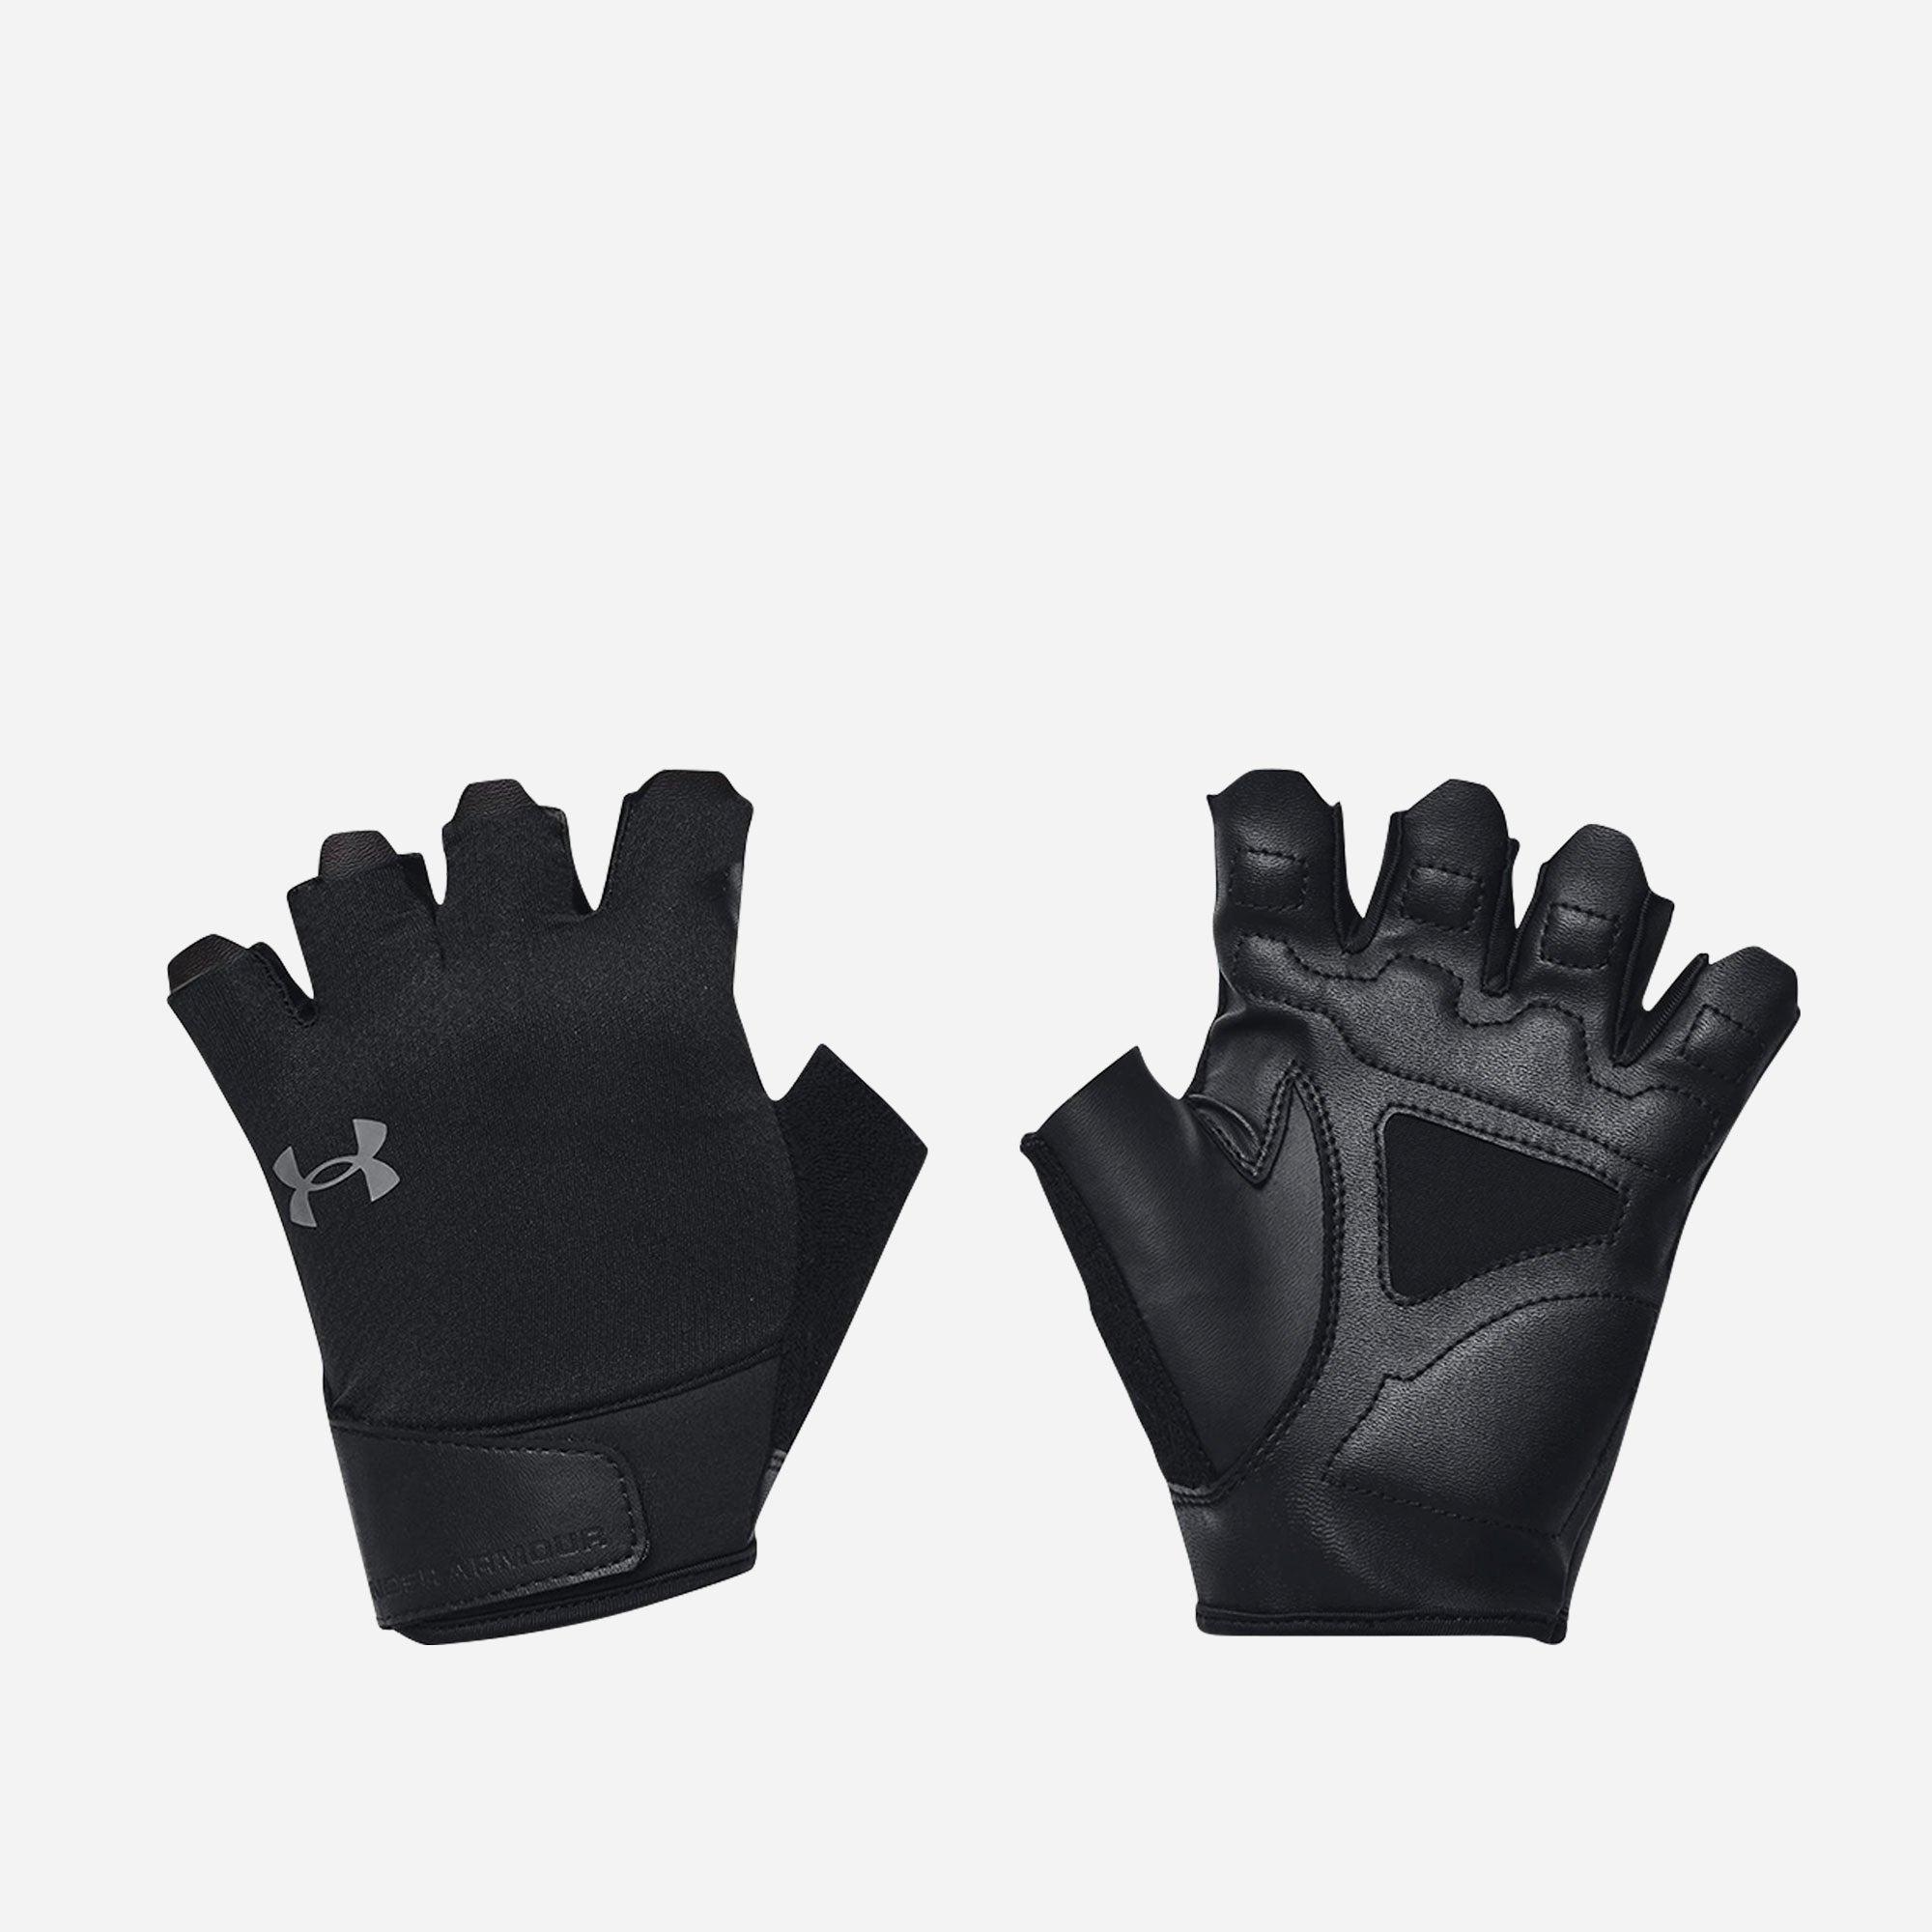 Găng tay thể thao nam Under Armour Half Finger - 1369826-044